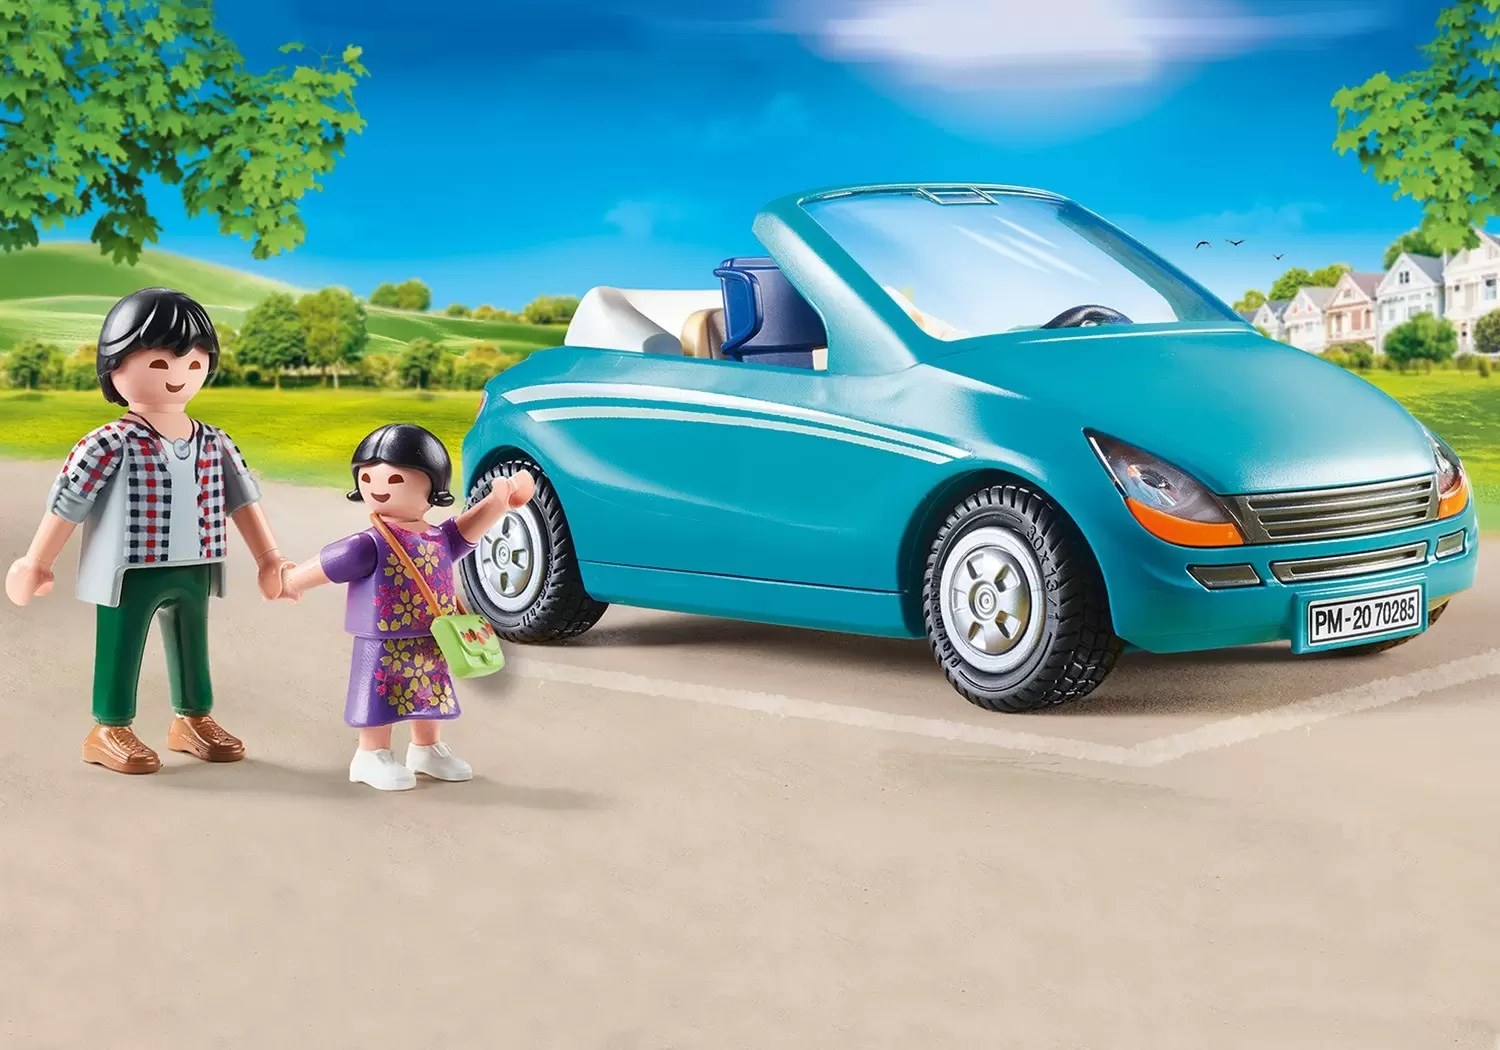 Playmobil in the City - Daddy with child and convertible car